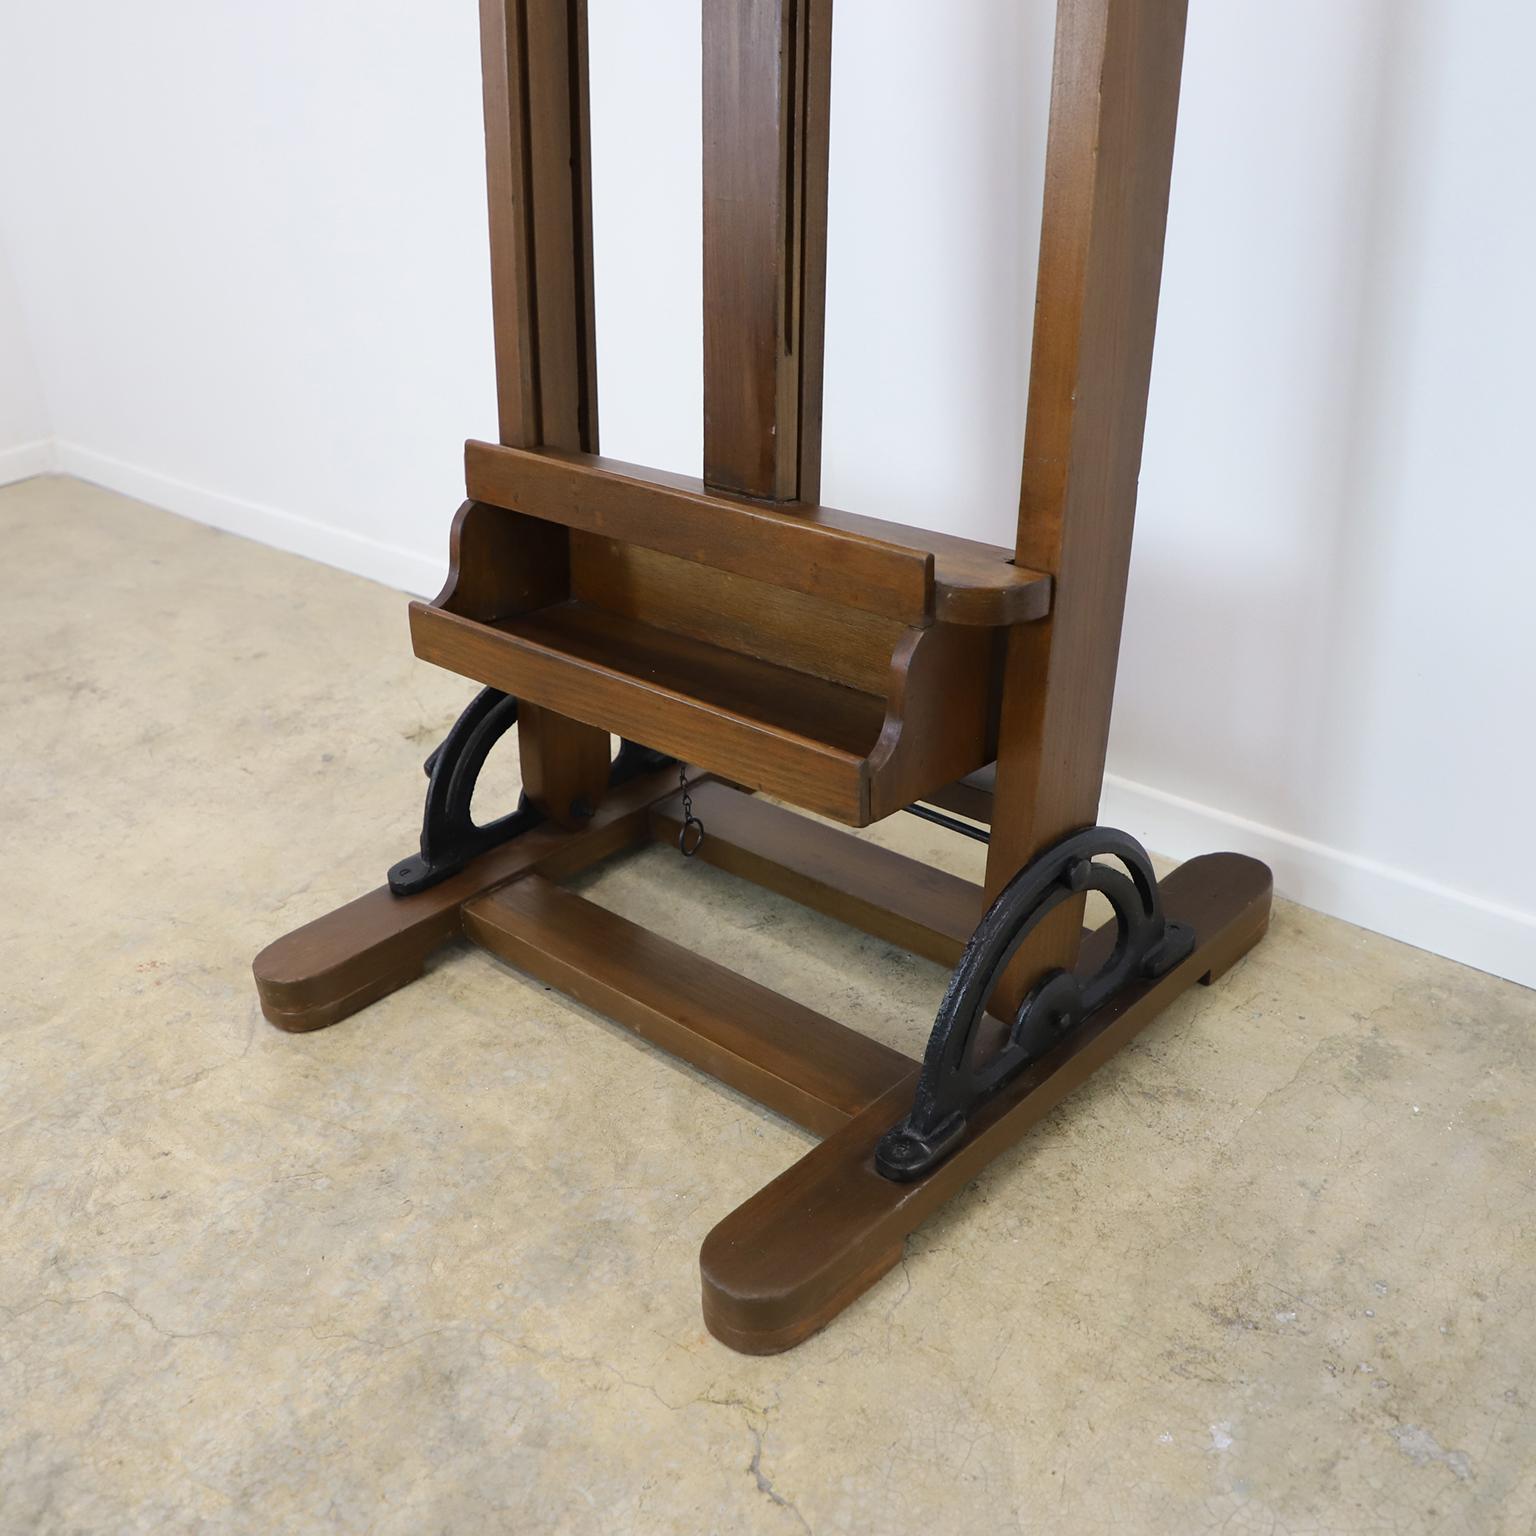 A Mexican wooden adjustable artist easel, circa 1950. This easel has the same design as those currently in the study of Diego Rivera and Frida Kahlo, standing tall, ready for the next Frida Kahlo! Height is adjustable.